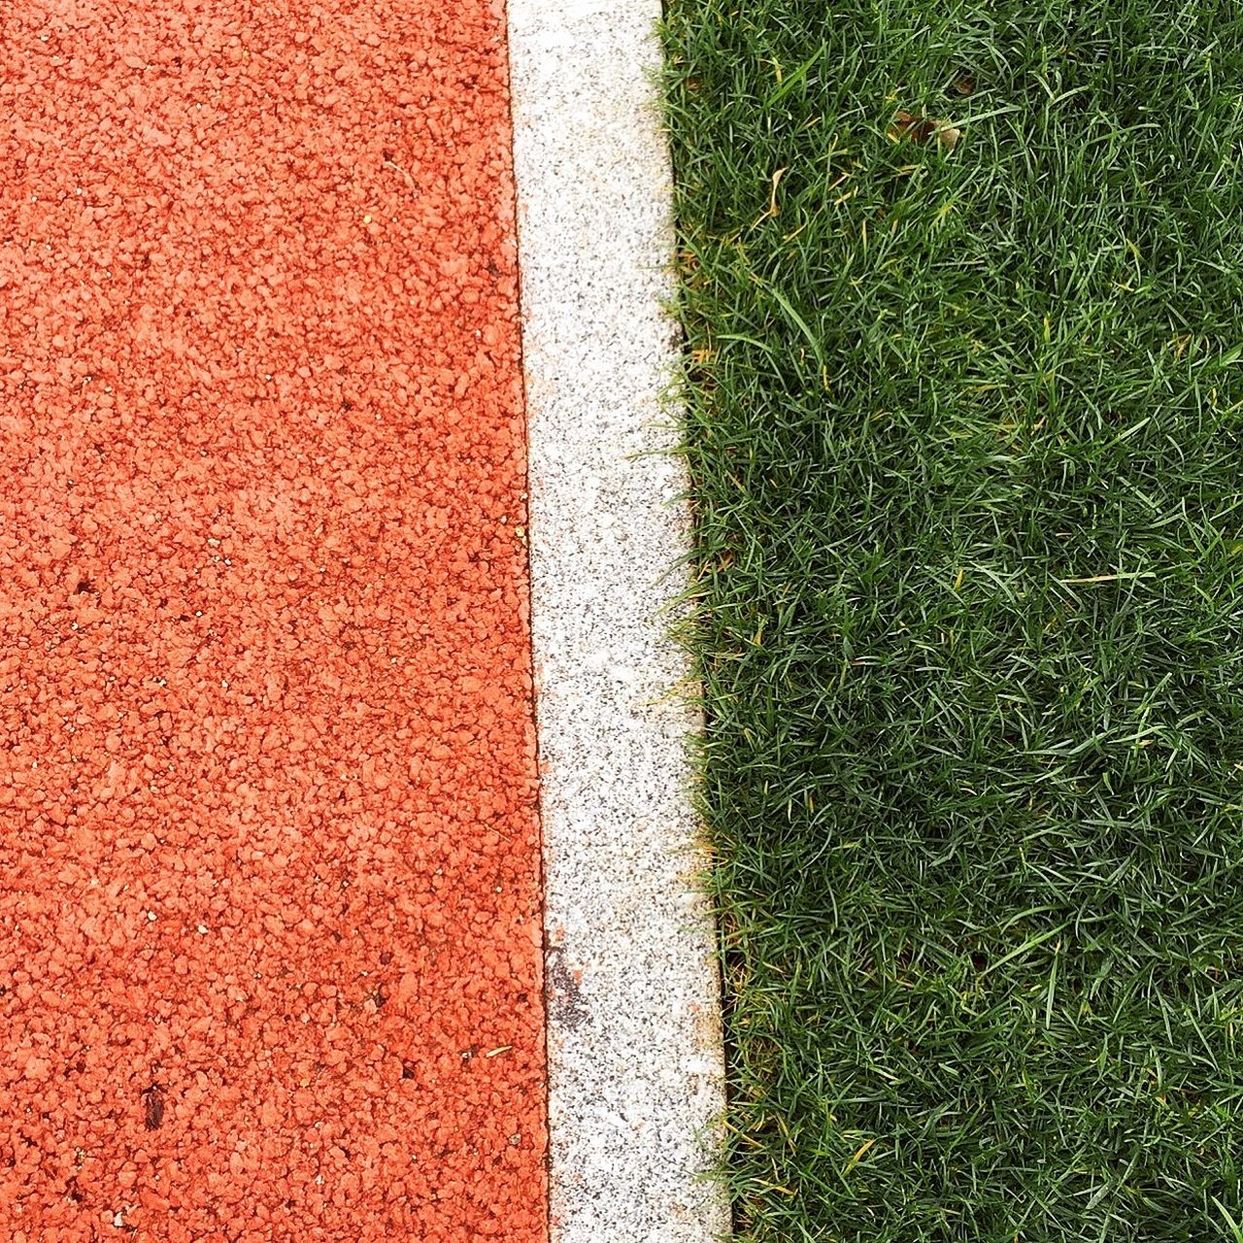 Detail shot of grass and ground